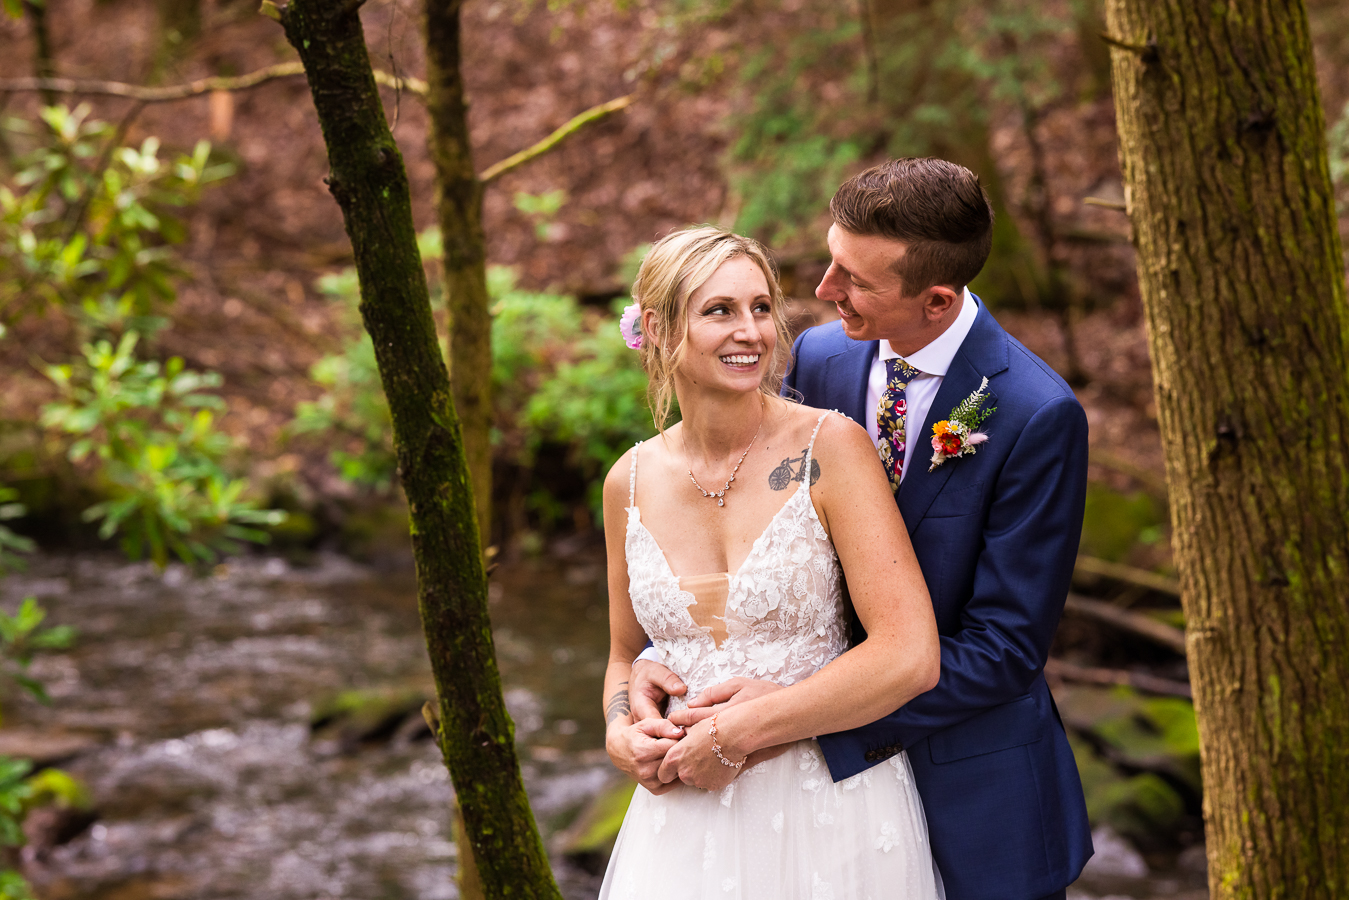 jim thorpe micro wedding photographer, lisa rhinehart, captures this romantic image of the bride and groom hugging one another and smiling as they have a stream, trees and nature behind them on this pa hiking trail